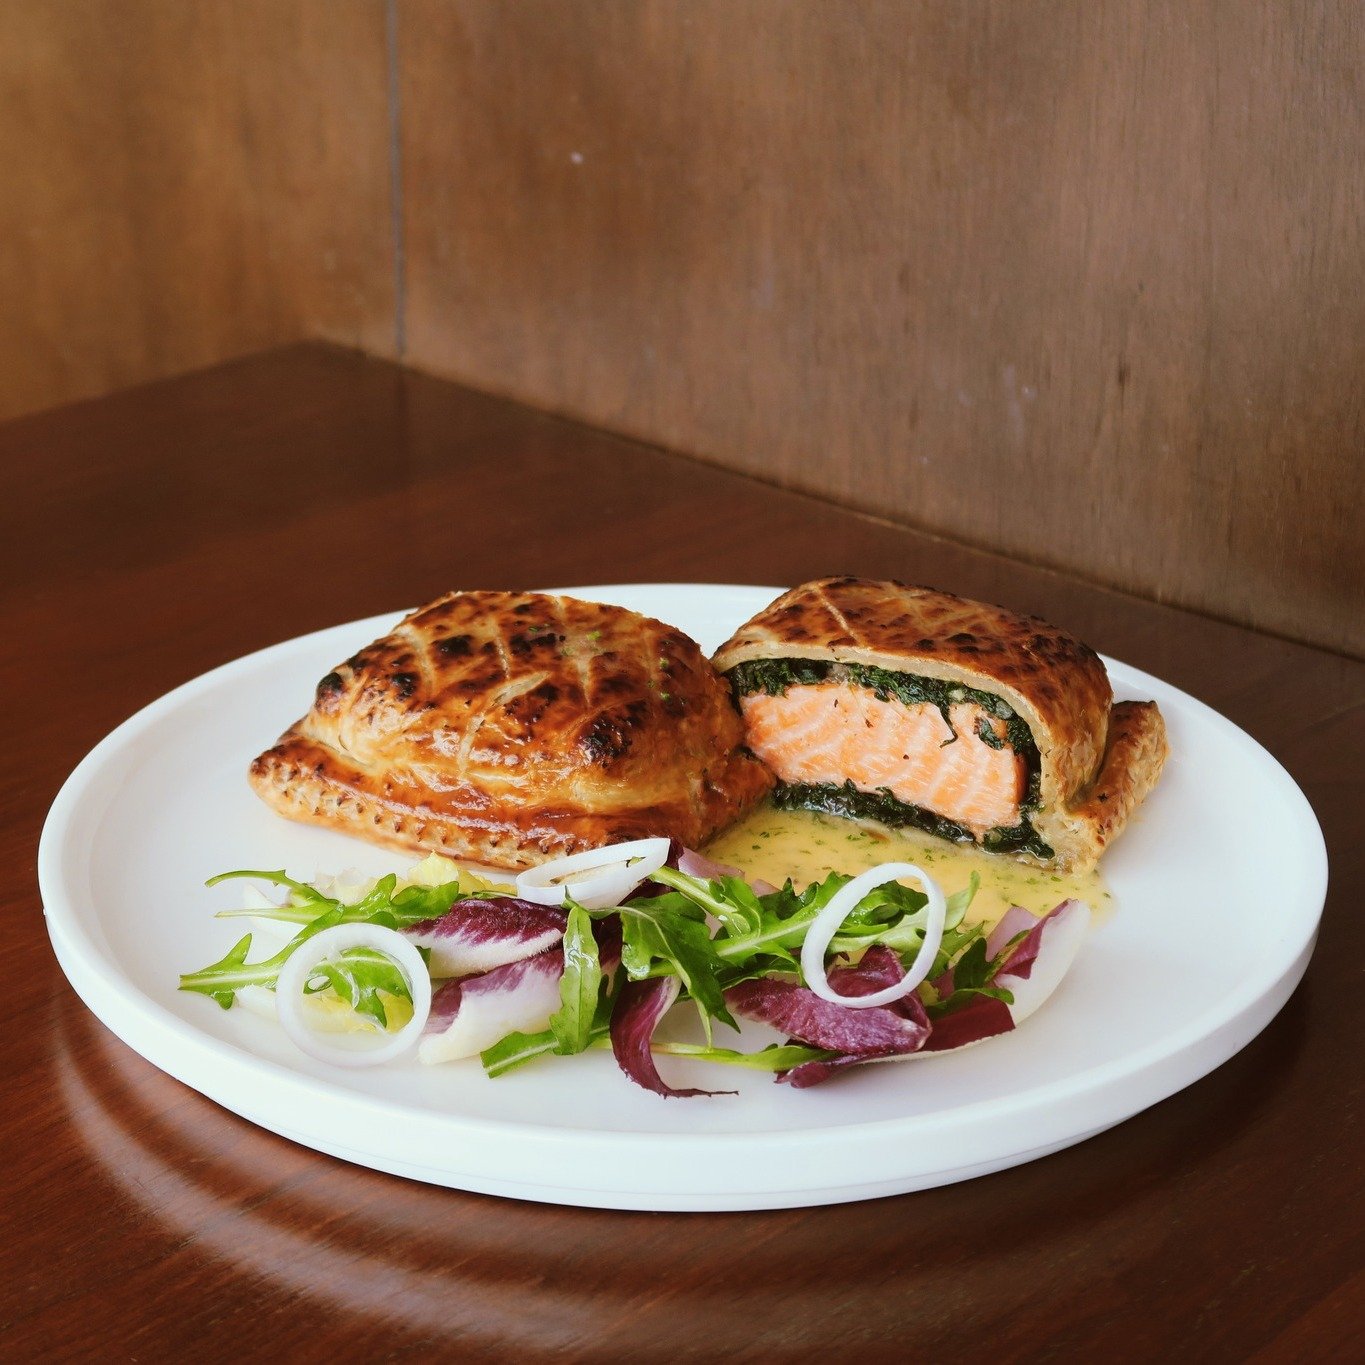 This weekend, from 10 to 12 May, indulge Mom with our Salmon Wellington!

Featuring a tender, flaky salmon fillet layered with savoury mushroom duxelle and encased in buttery puff pastry, the star of our Mother's Day specials is finished with tarrago